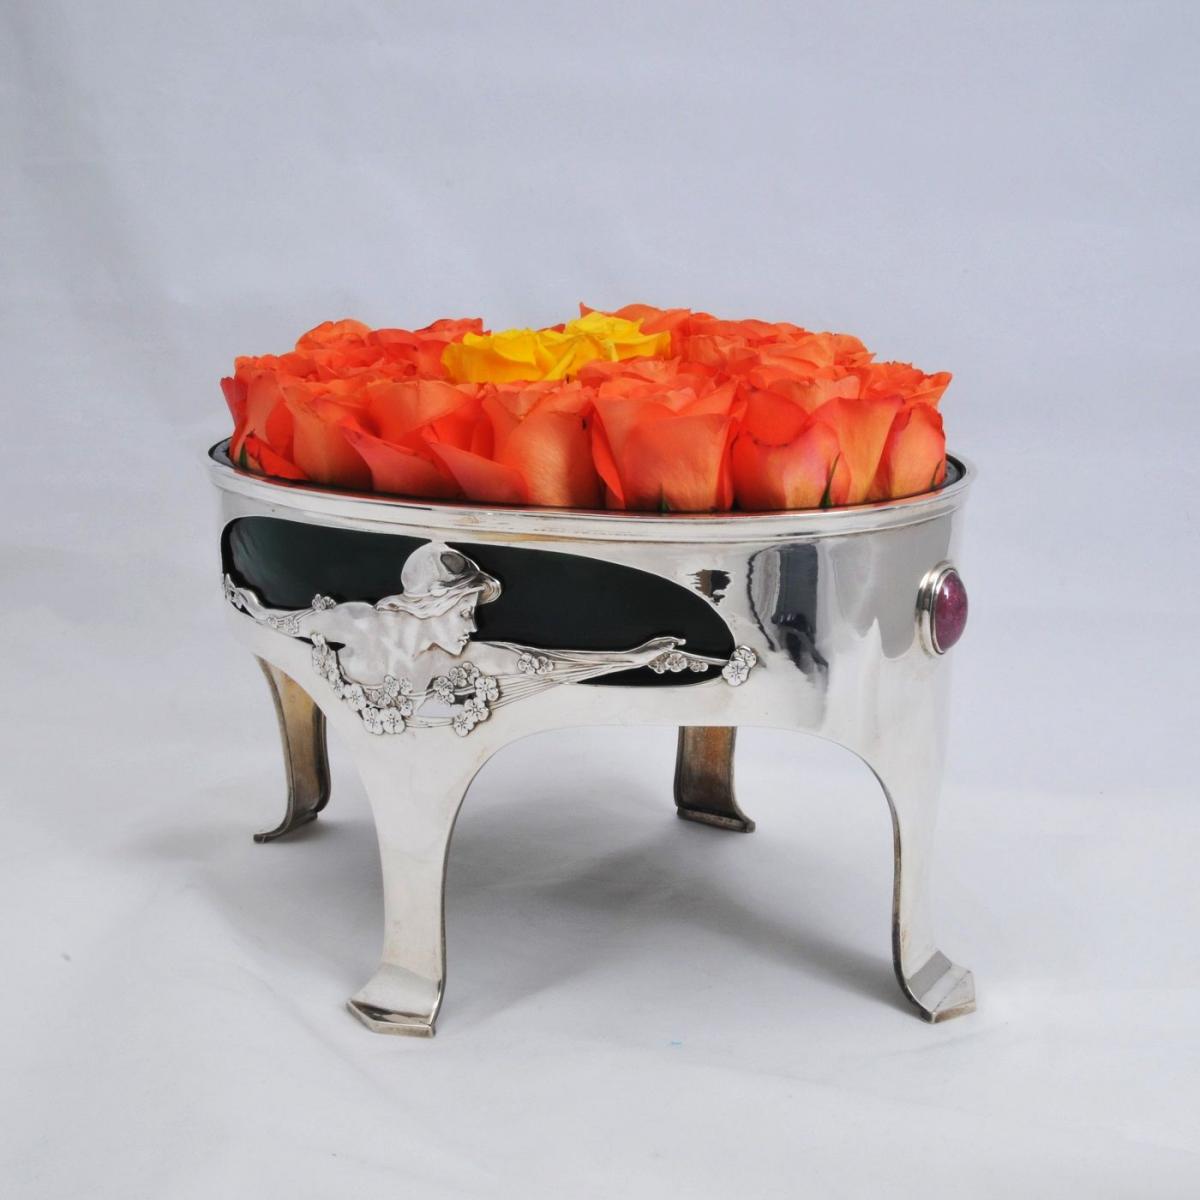 A large fruitbowl or flower centrepiece by Kate Harris